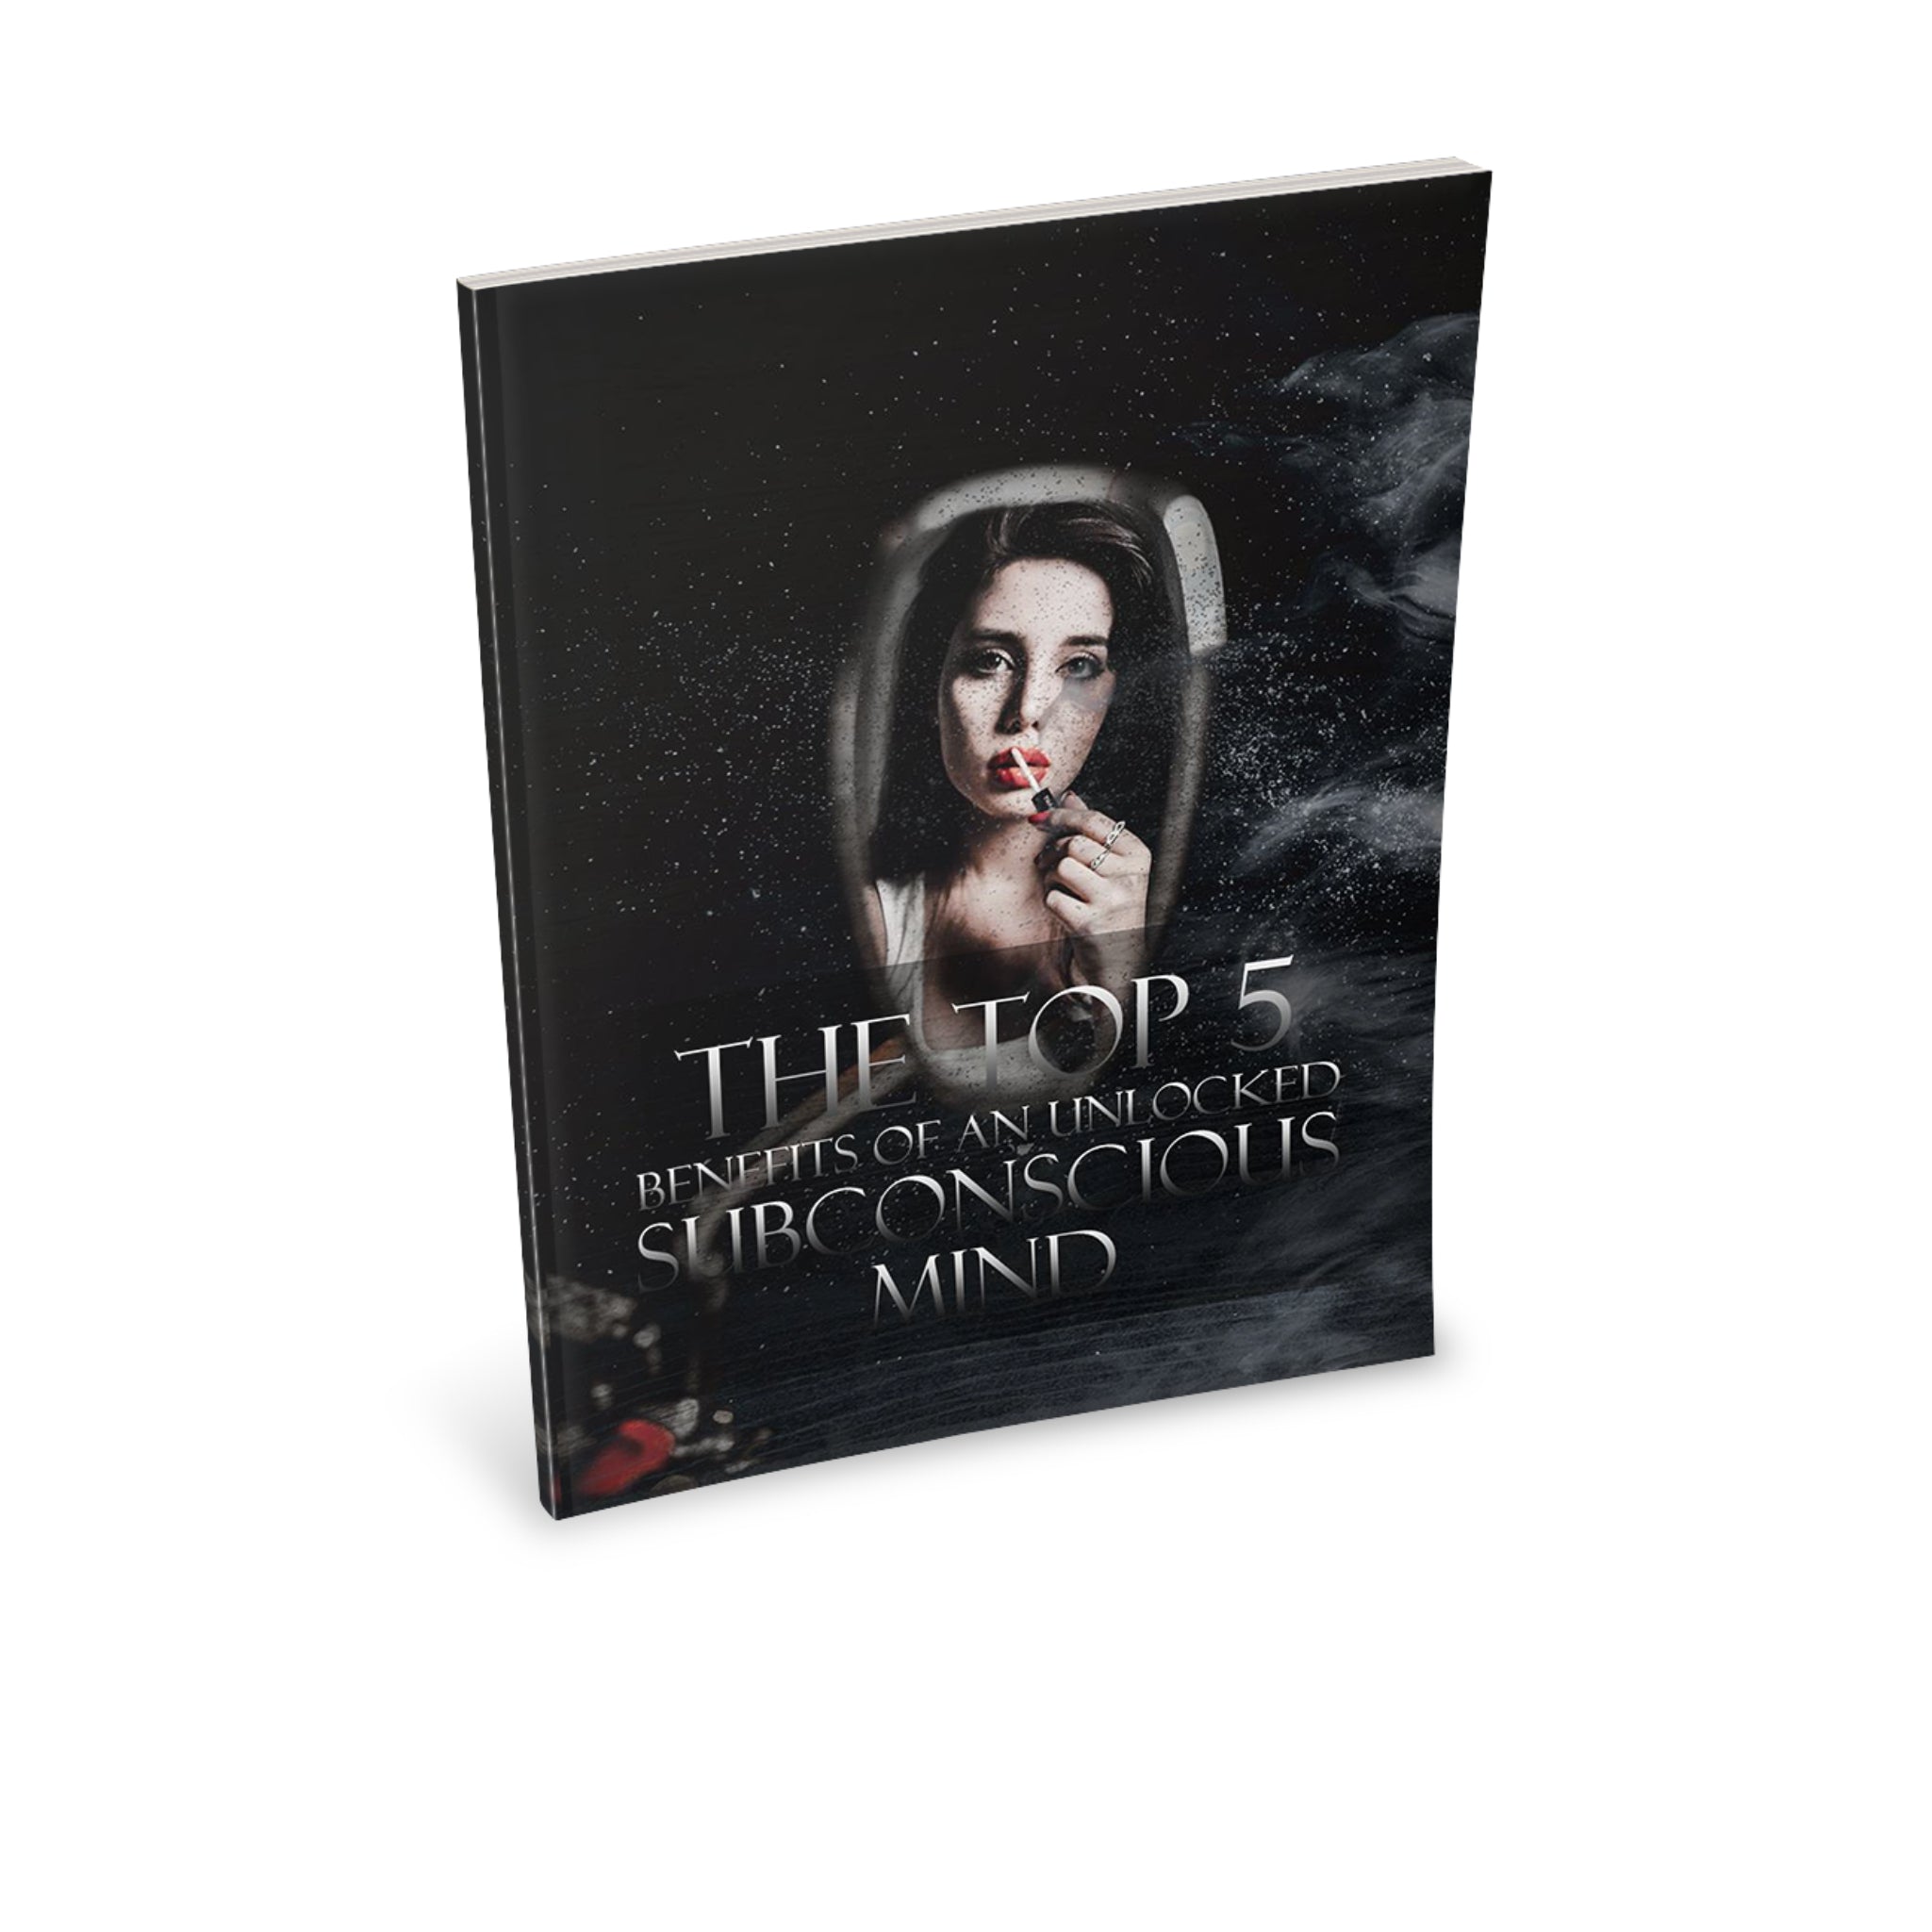 The Top 5 Benefits Of an Unlocked Subconscious Mind Ebook